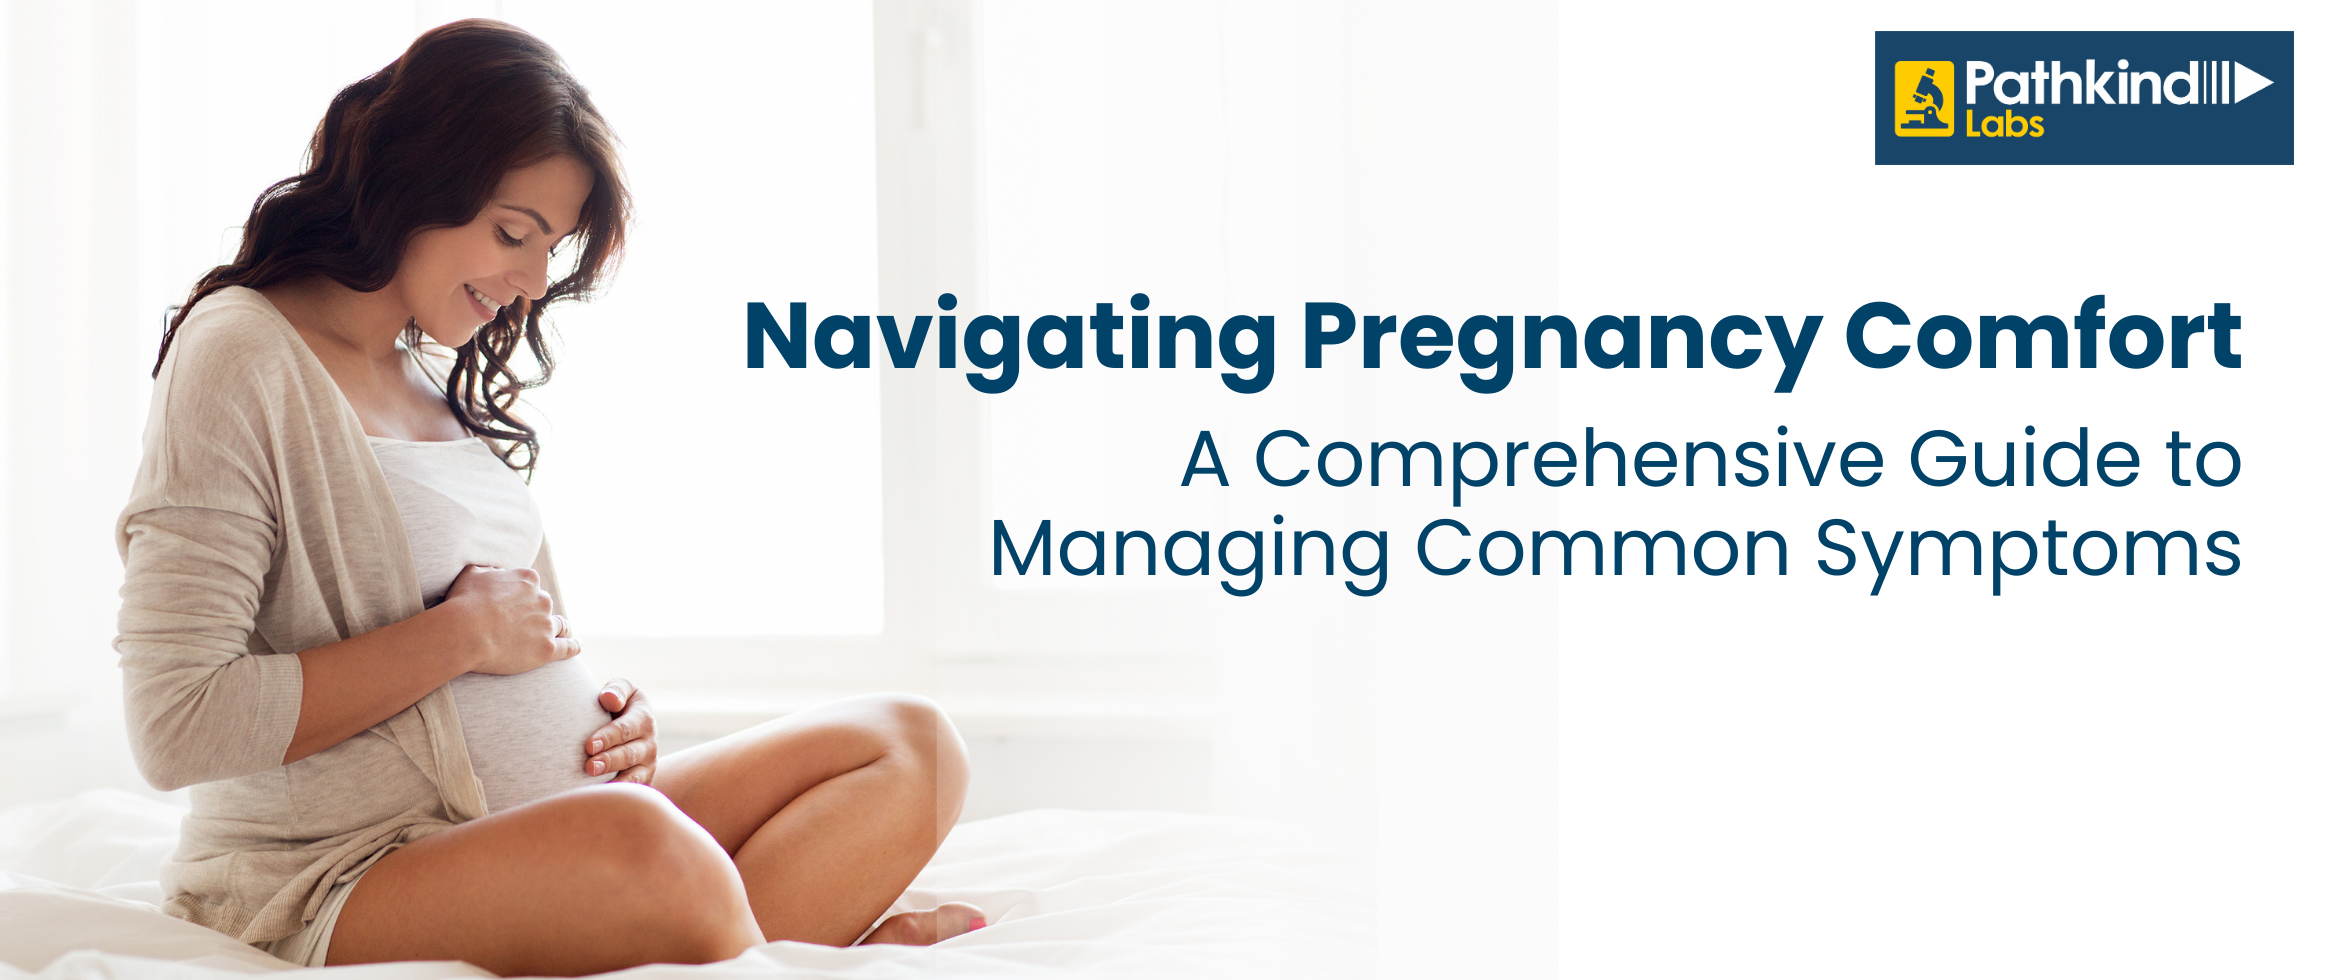 Navigating Pregnancy Comfort: A Comprehensive Guide to Managing Common Symptoms